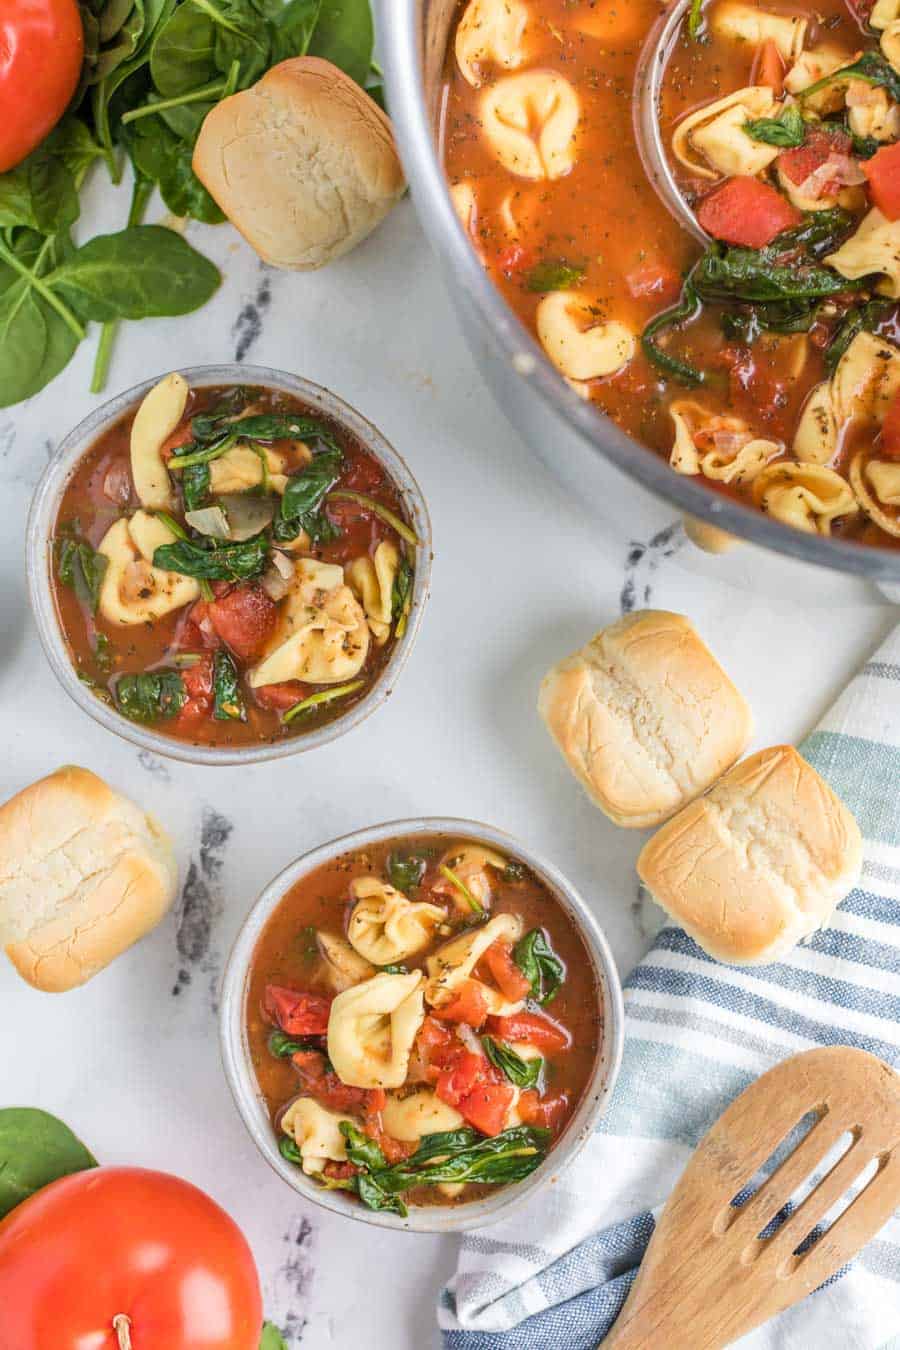 completed bowls of tortellini tomato soup in a scene over marble table with rolls, whole tomatoes, a wooden spoon, and the edge of the large pot of soup with a ladle in it